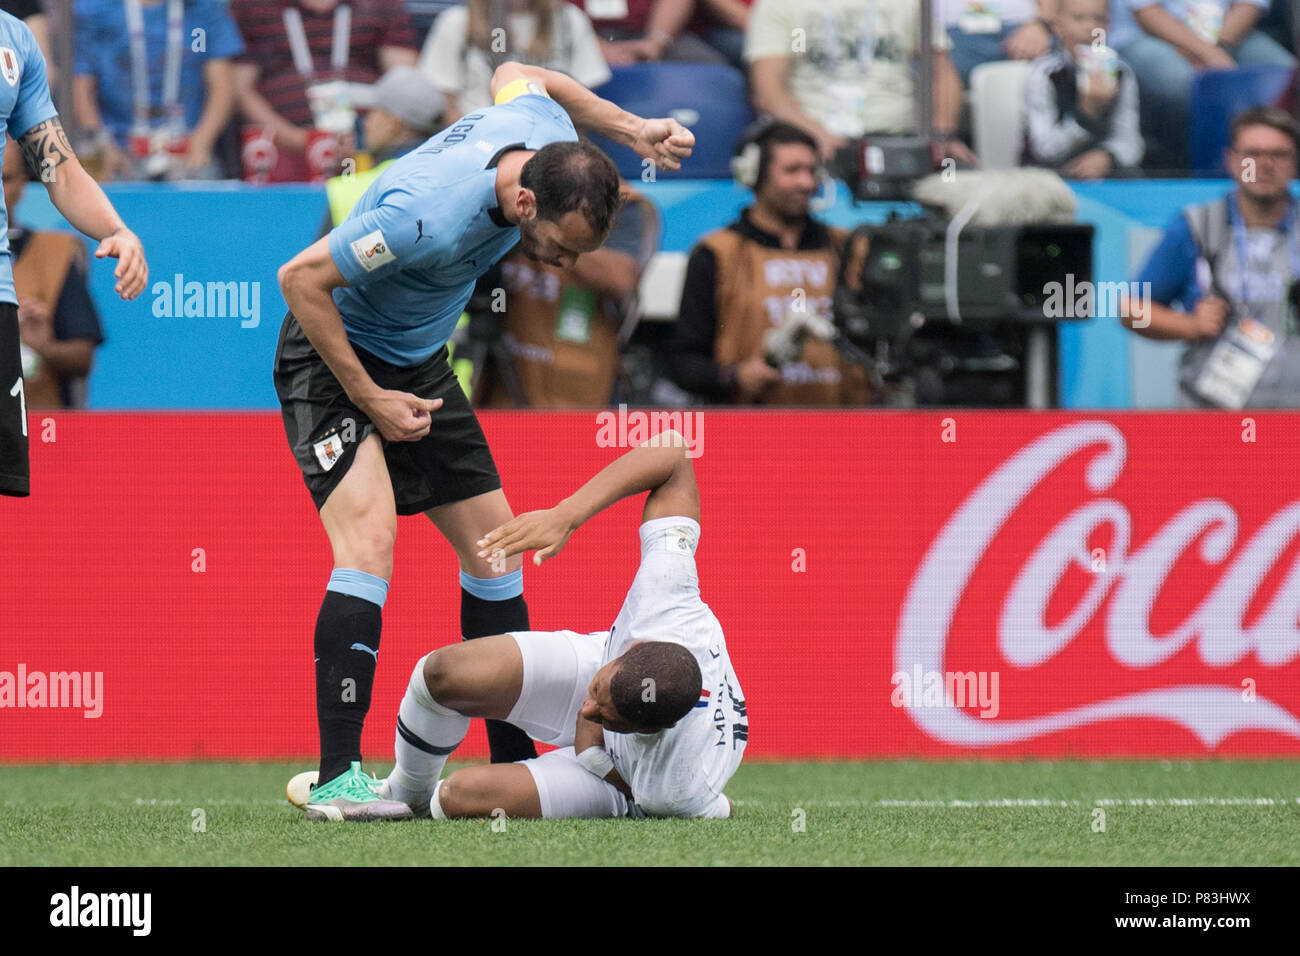 Diego GODIN (URU) wants Kylian MBAPPE (FRA) getting up, frustrated, frustrated, late-rateed, disappointed, showered, decapitation, disappointment, sad, hurt, injury, lying, whole figure, Uruguay (URU) - France (FRA) 0: 2, Quarterfinals, Game 57, on 06.07.2018 in Nizhny Novgorod; Football World Cup 2018 in Russia from 14.06. - 15.07.2018. | usage worldwide Stock Photo